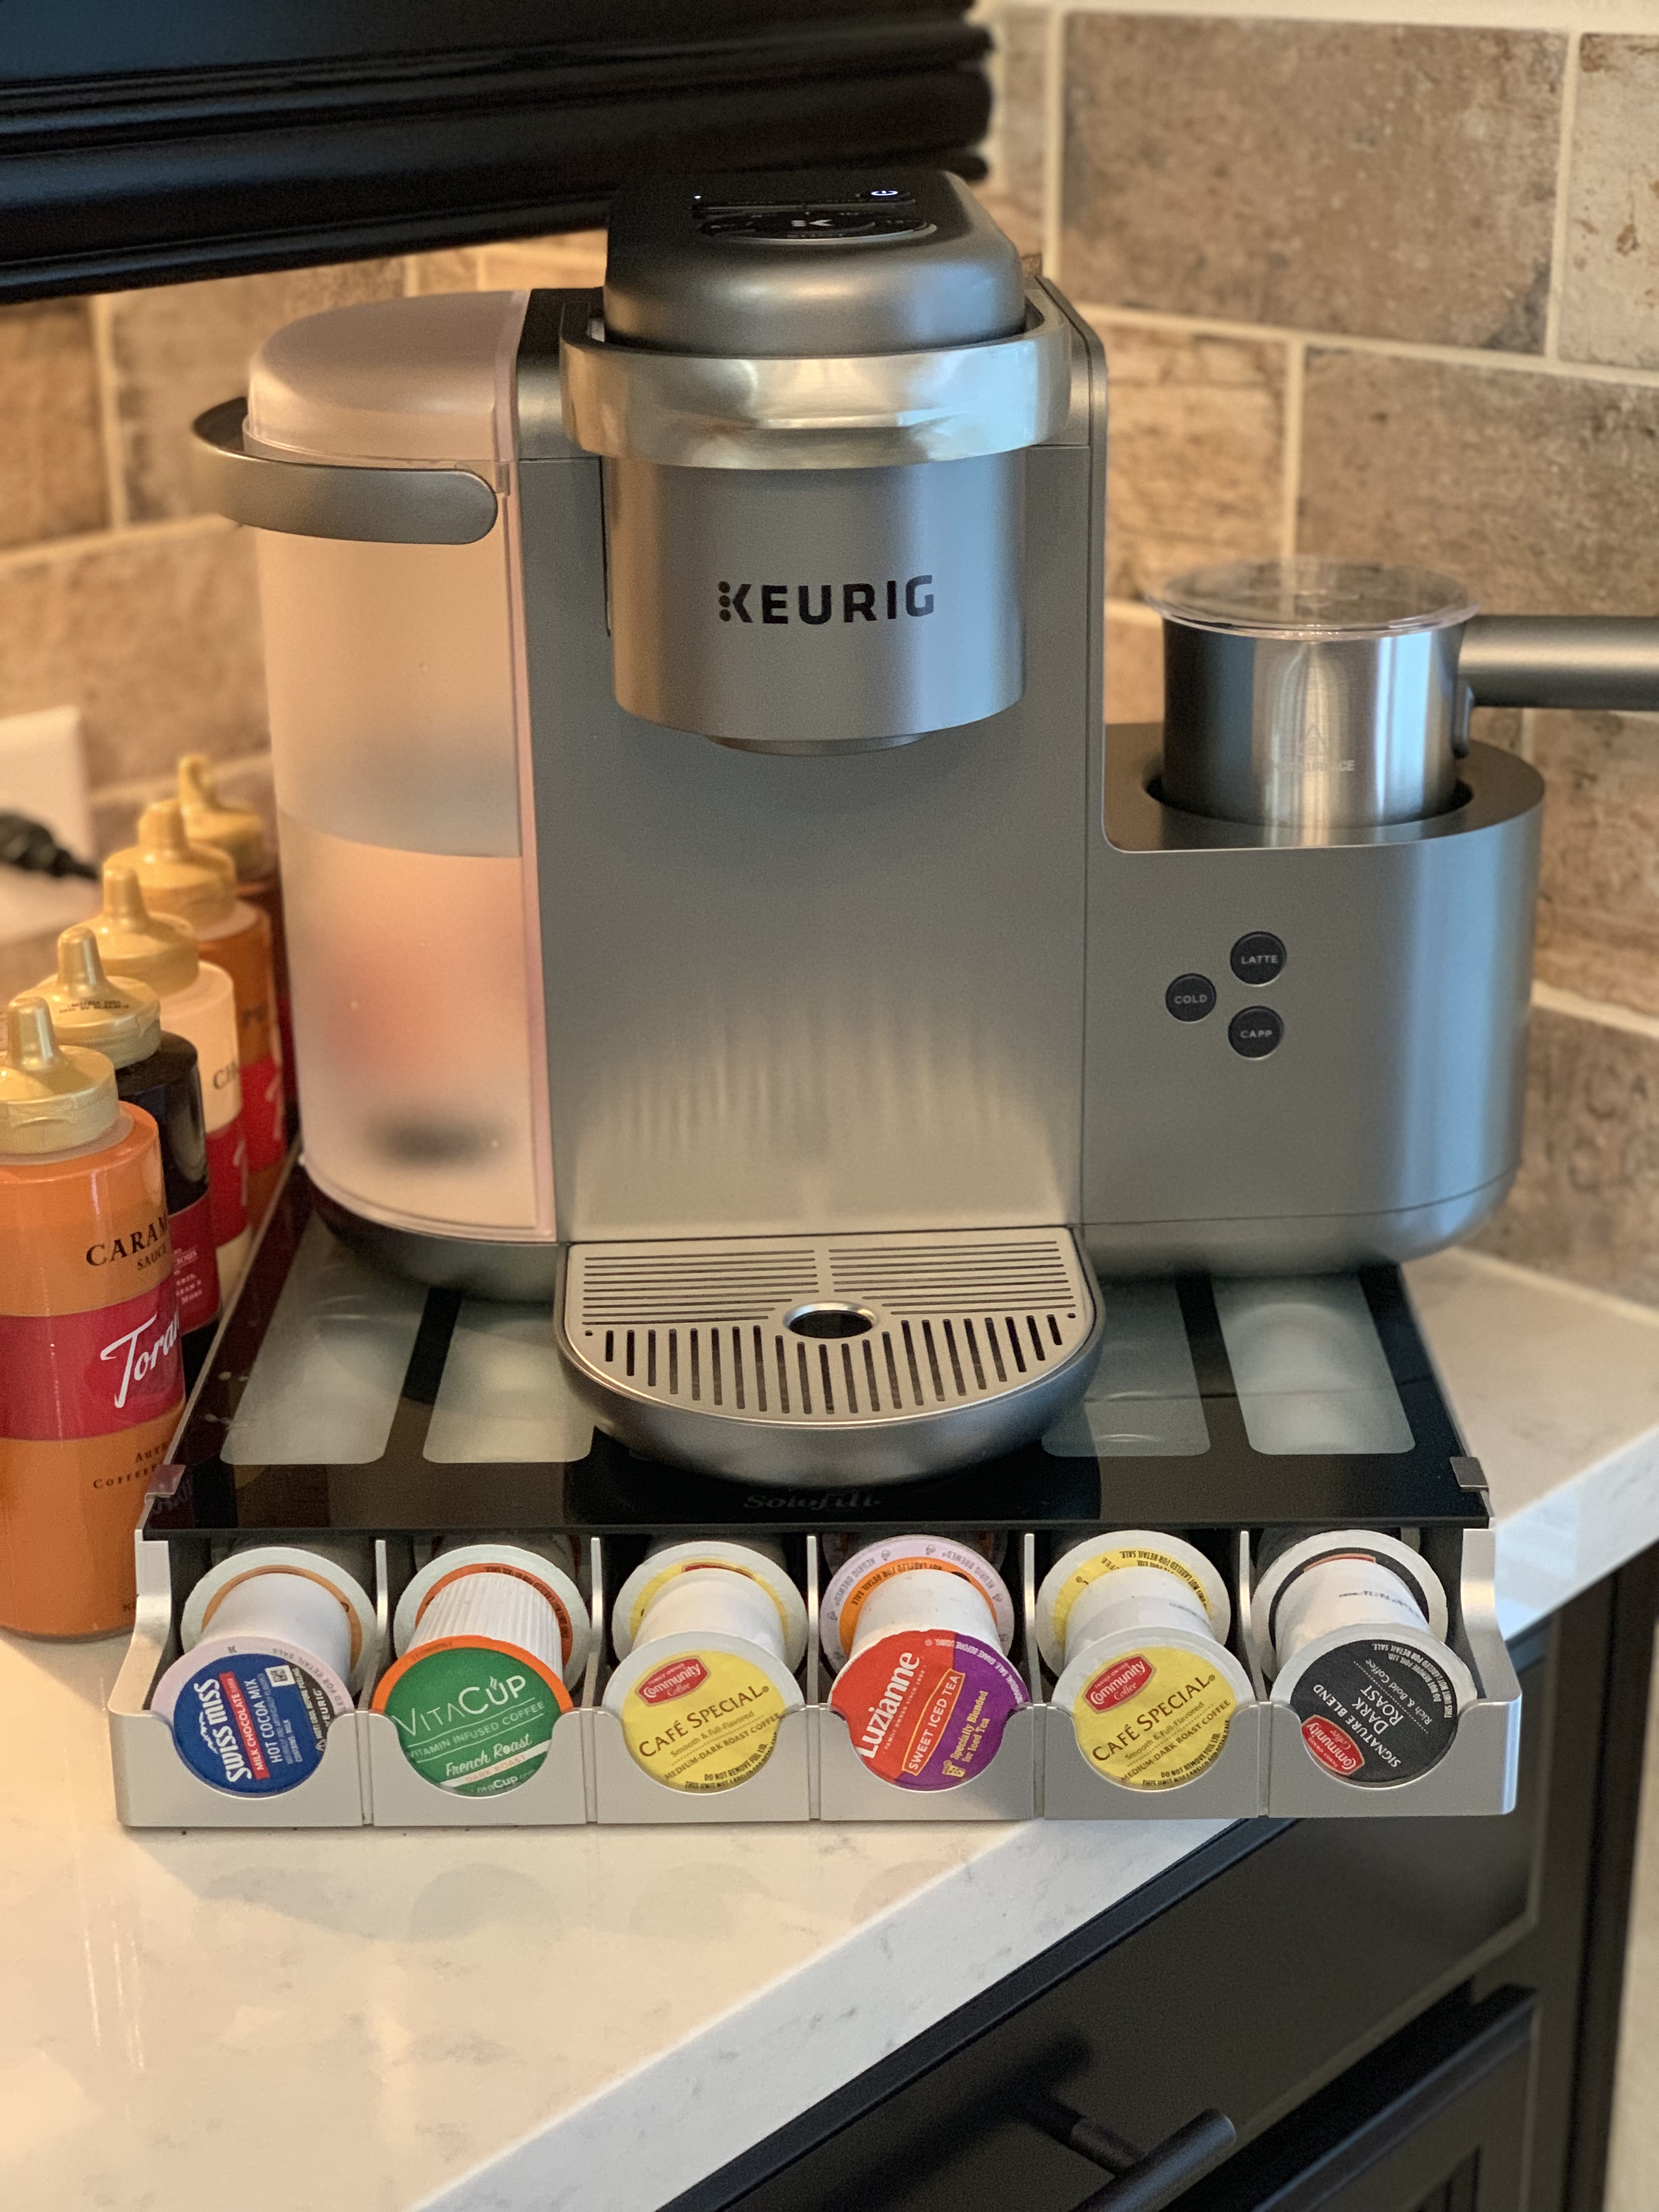  Keurig K-Cafe Special Edition Coffee Maker with Latte